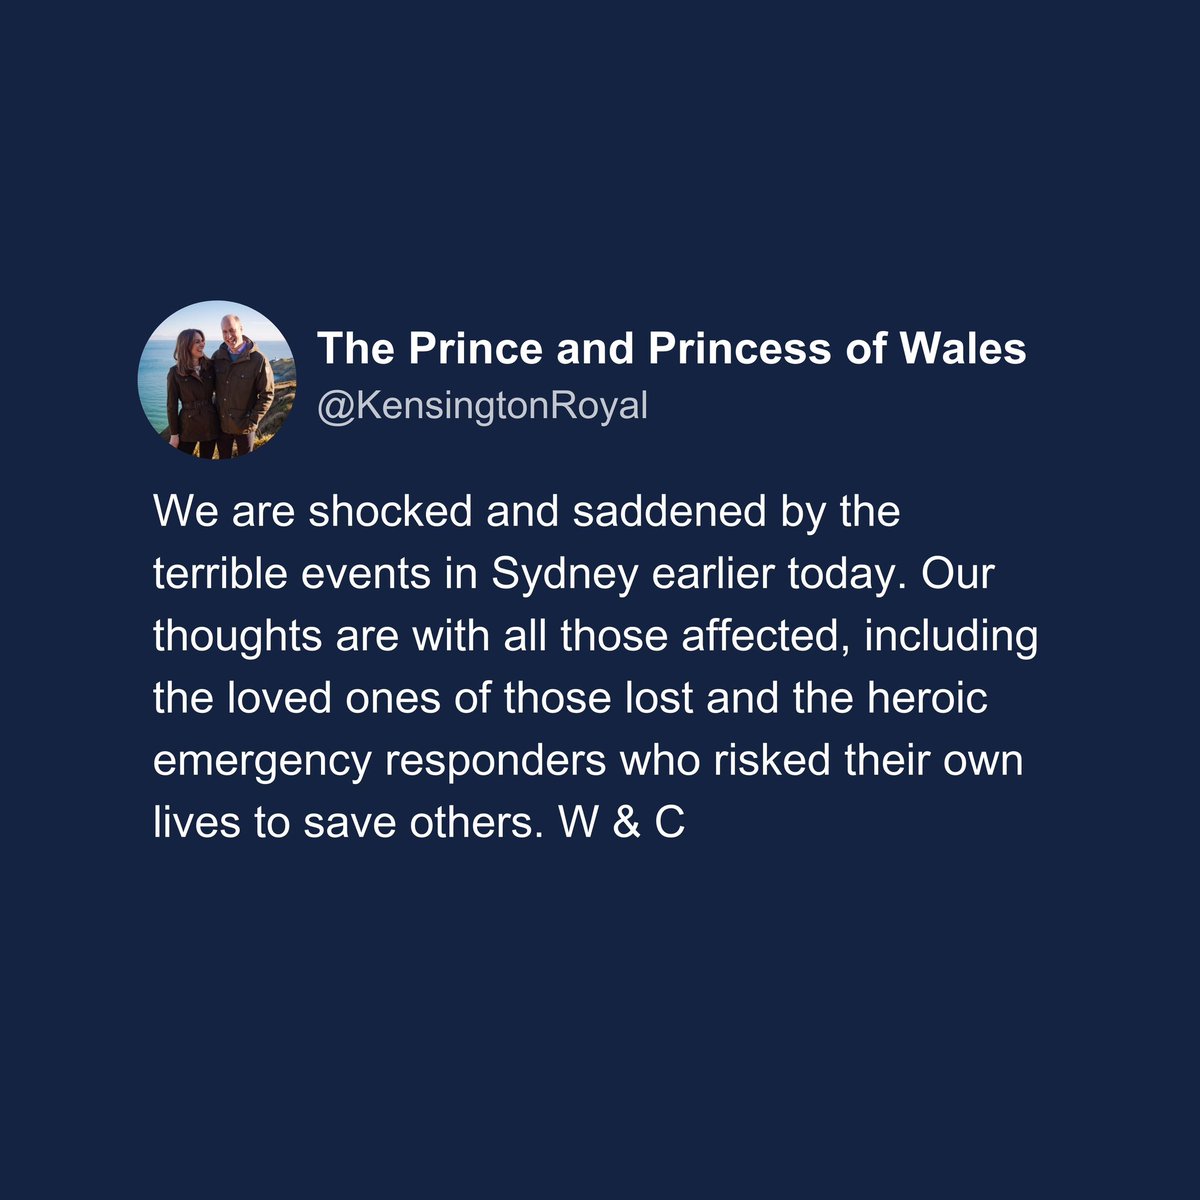 A statement from the Prince and Princess of Wales following the tragic events in Sydney.